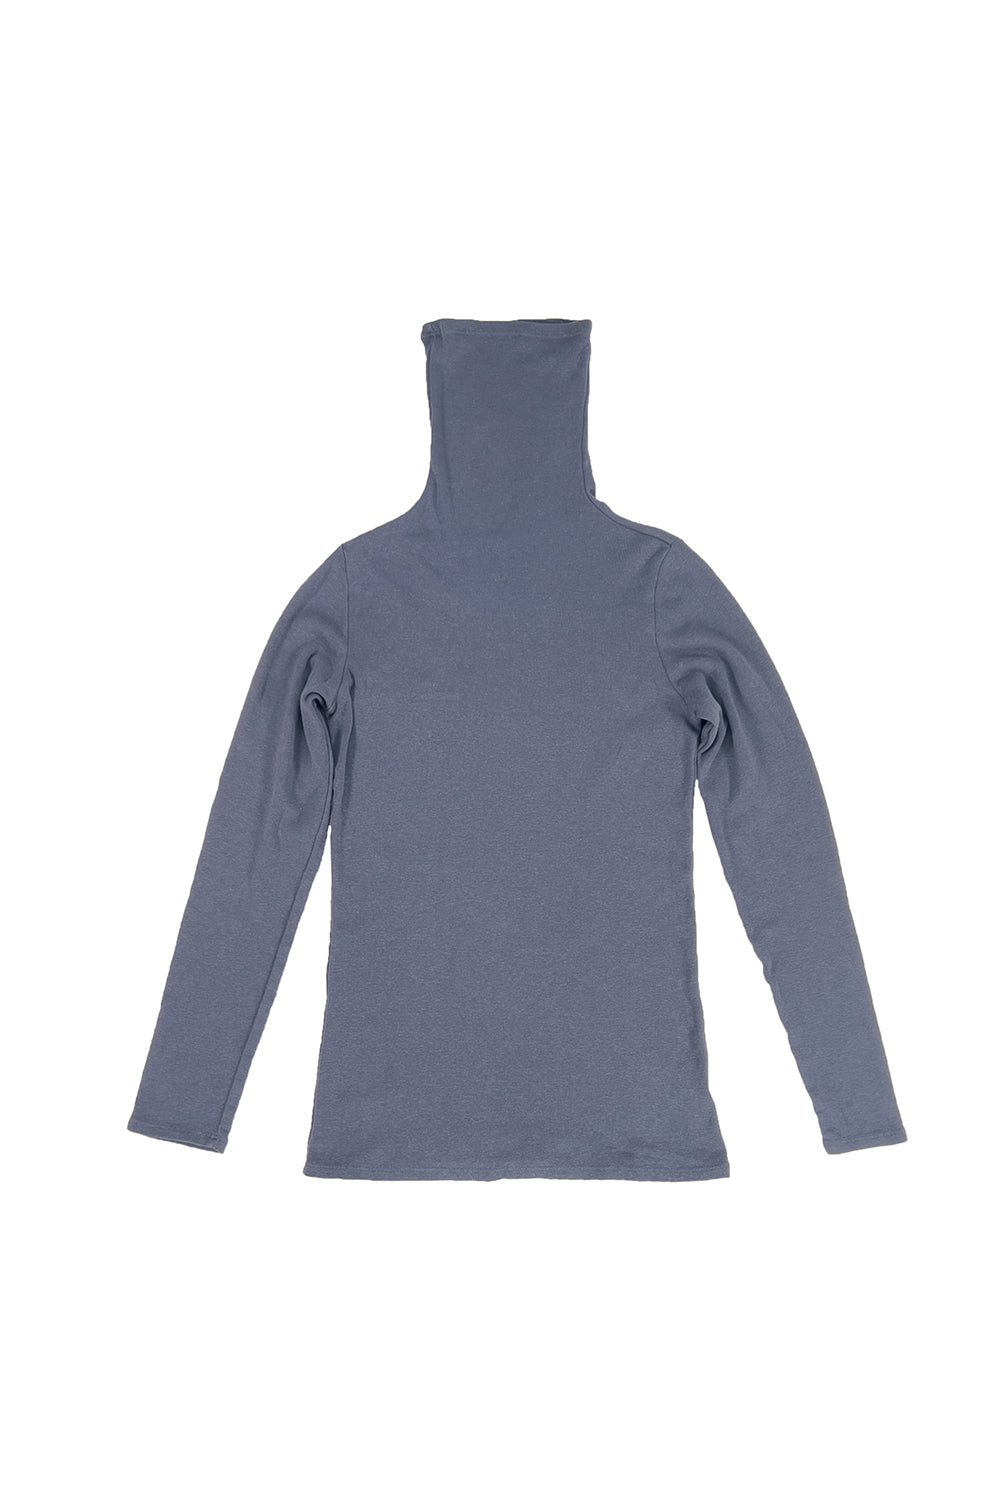 Whidbey Turtleneck  Jungmaven Hemp Clothing & Accessories - USA Made